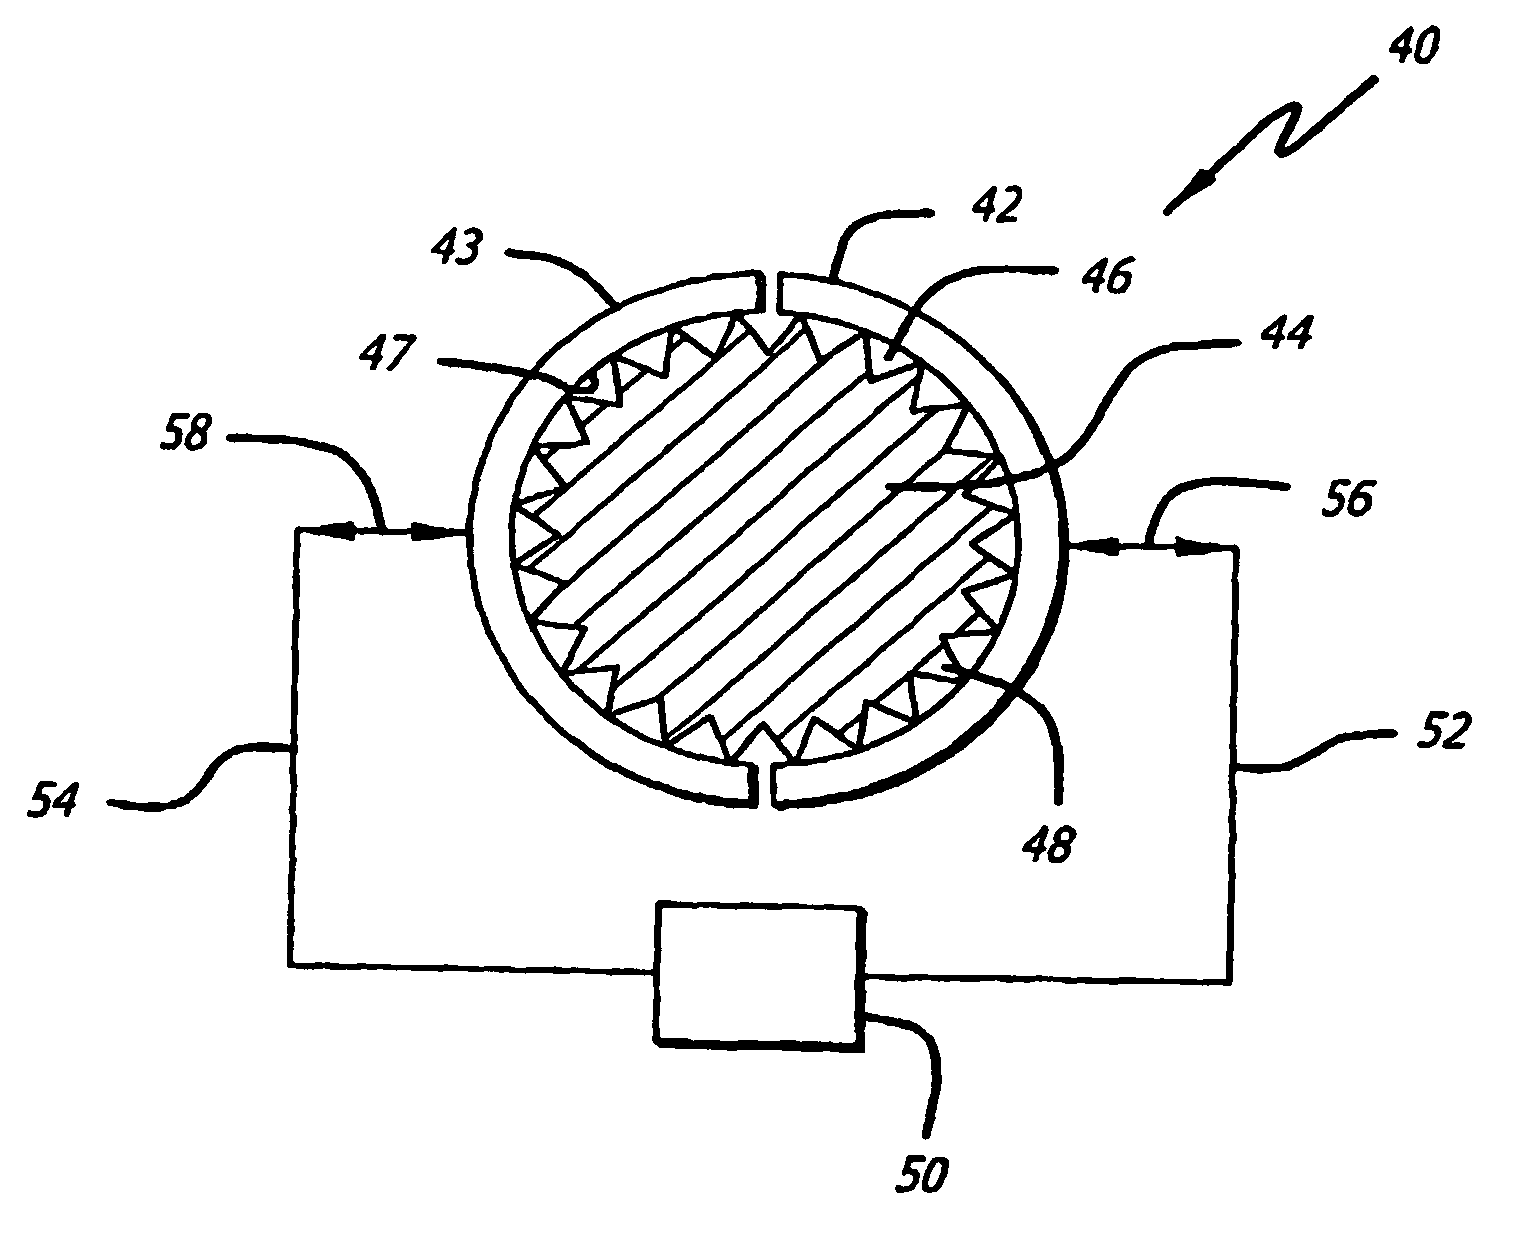 Infinitely adjustable engagement system and method